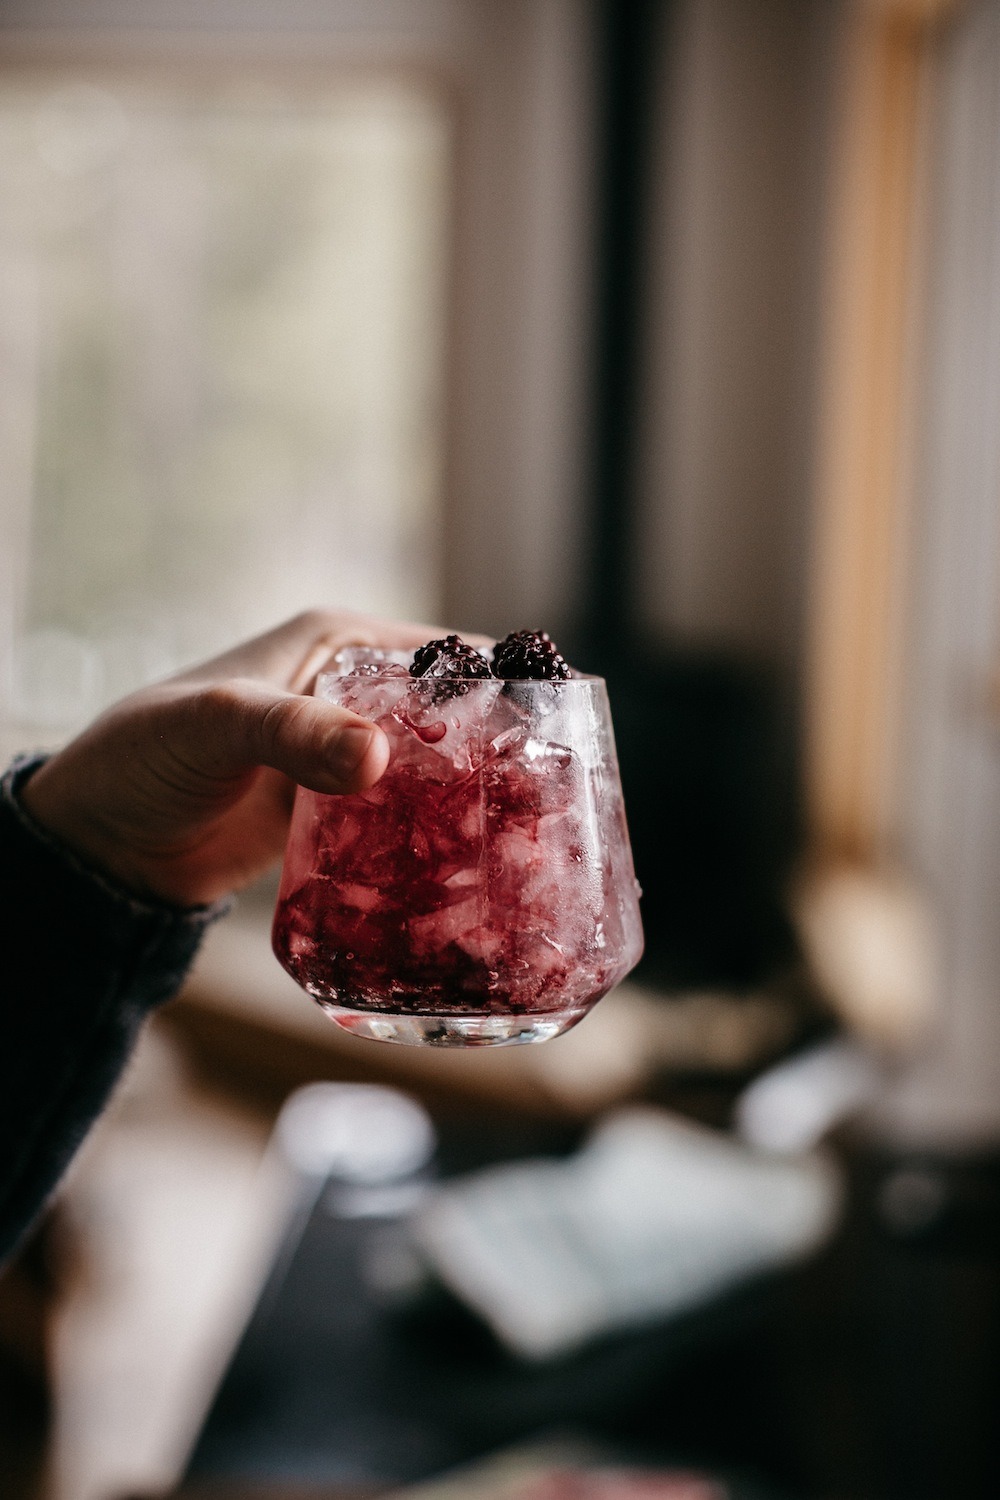 urbanoutfitters:
“ We made a blackberry bramble cocktail and you should too.
”